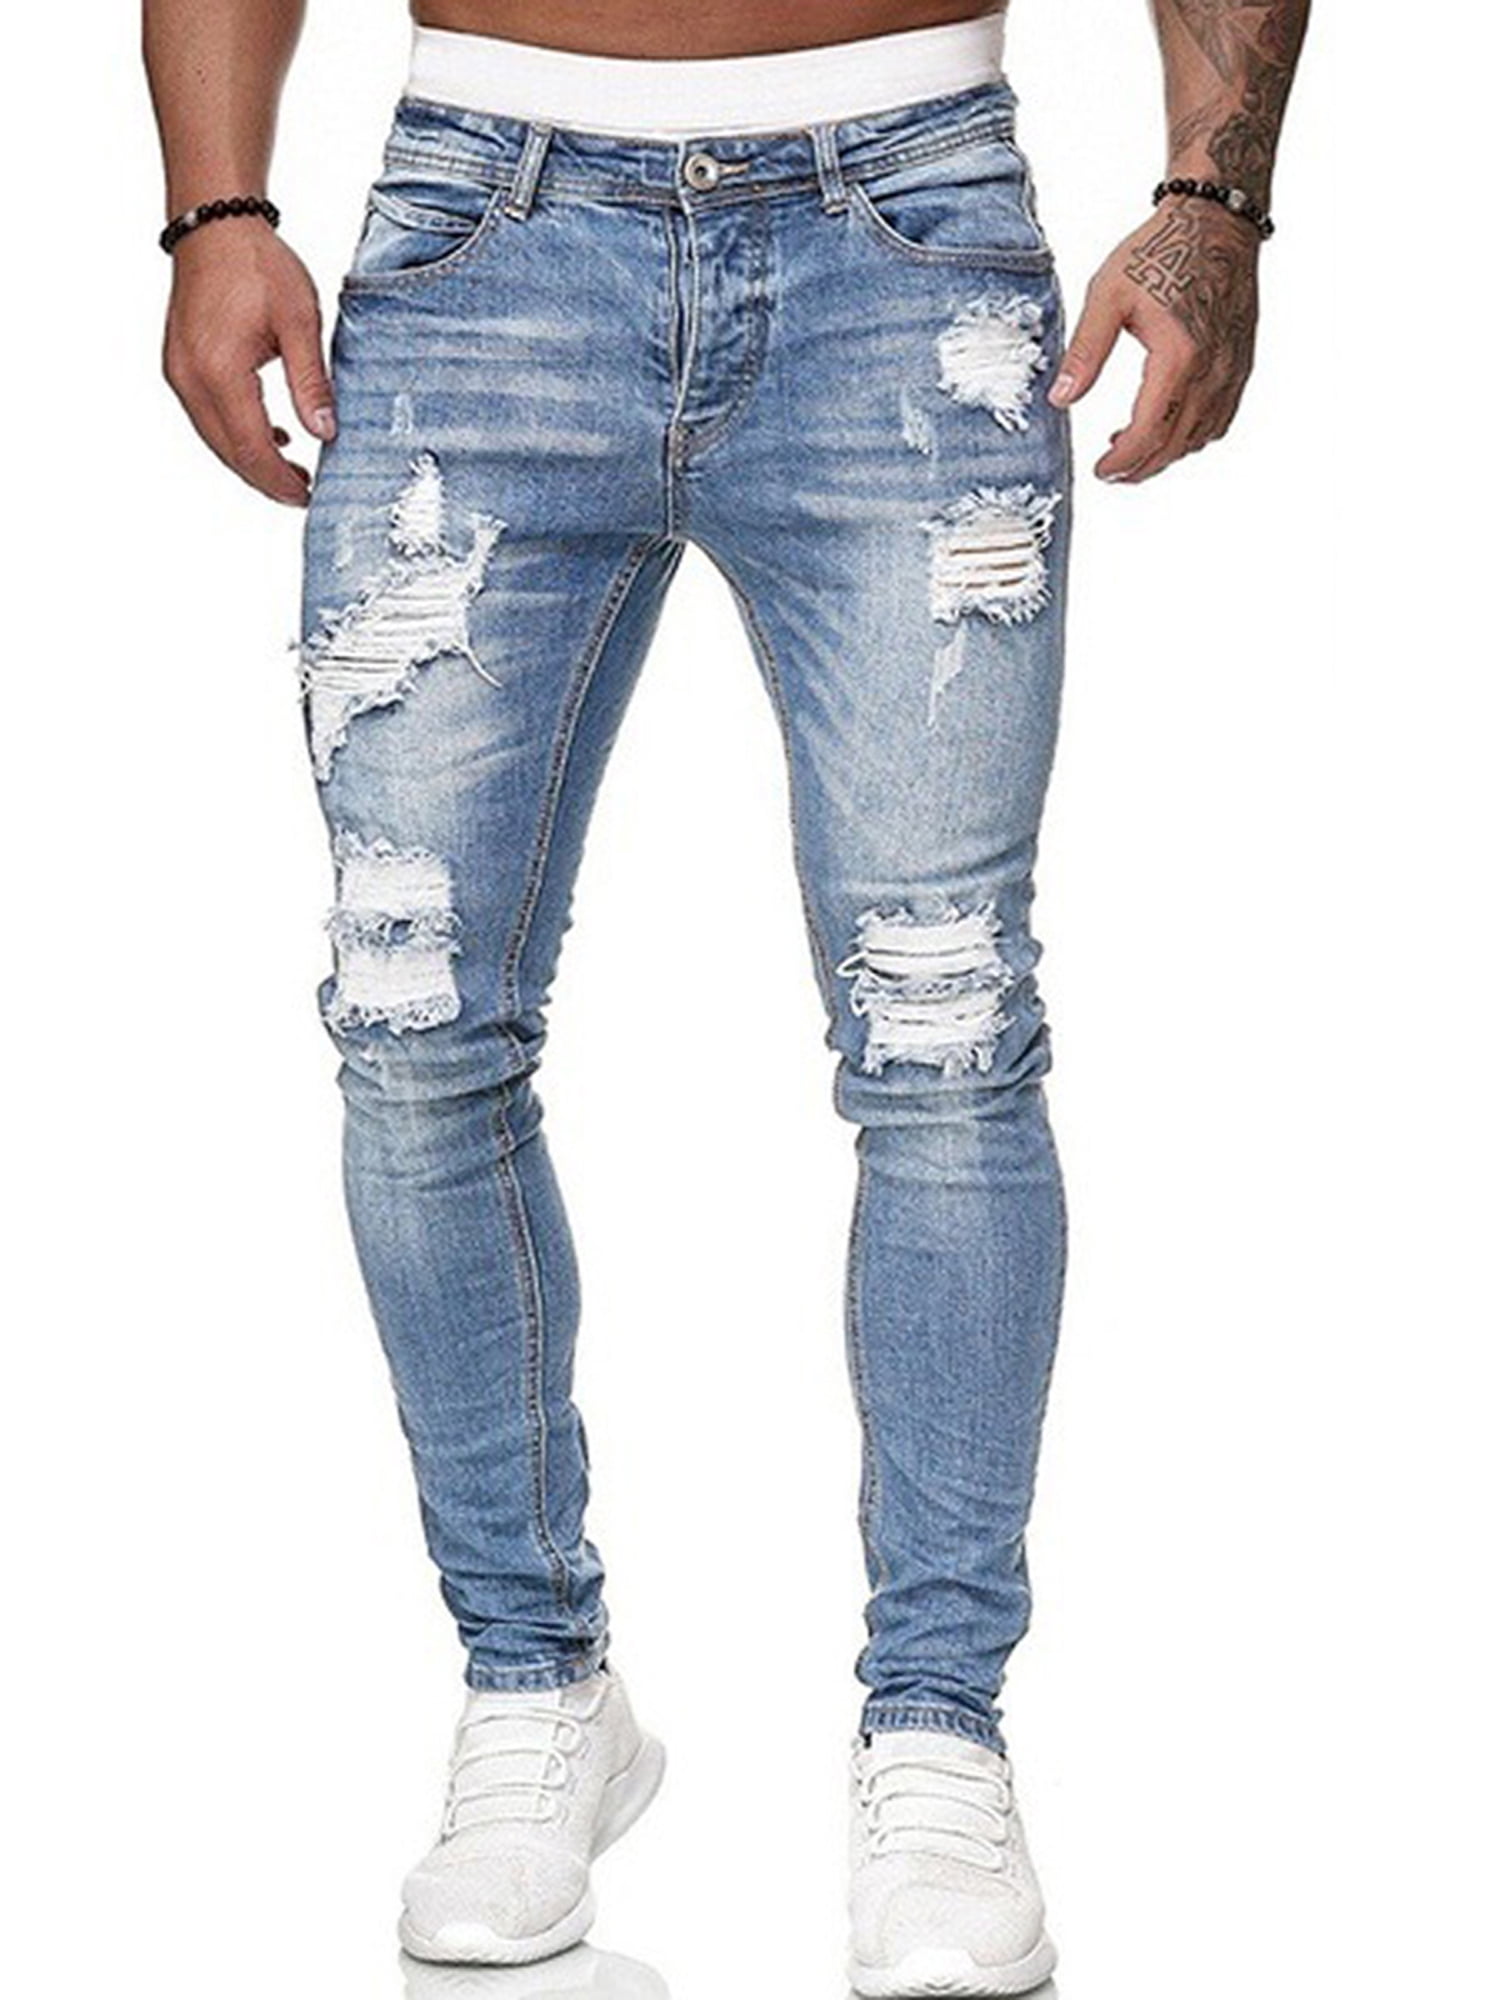 Cloudstyle Mens Ripped Biker Washed Jeans Skinny Fit Distressed India | Ubuy